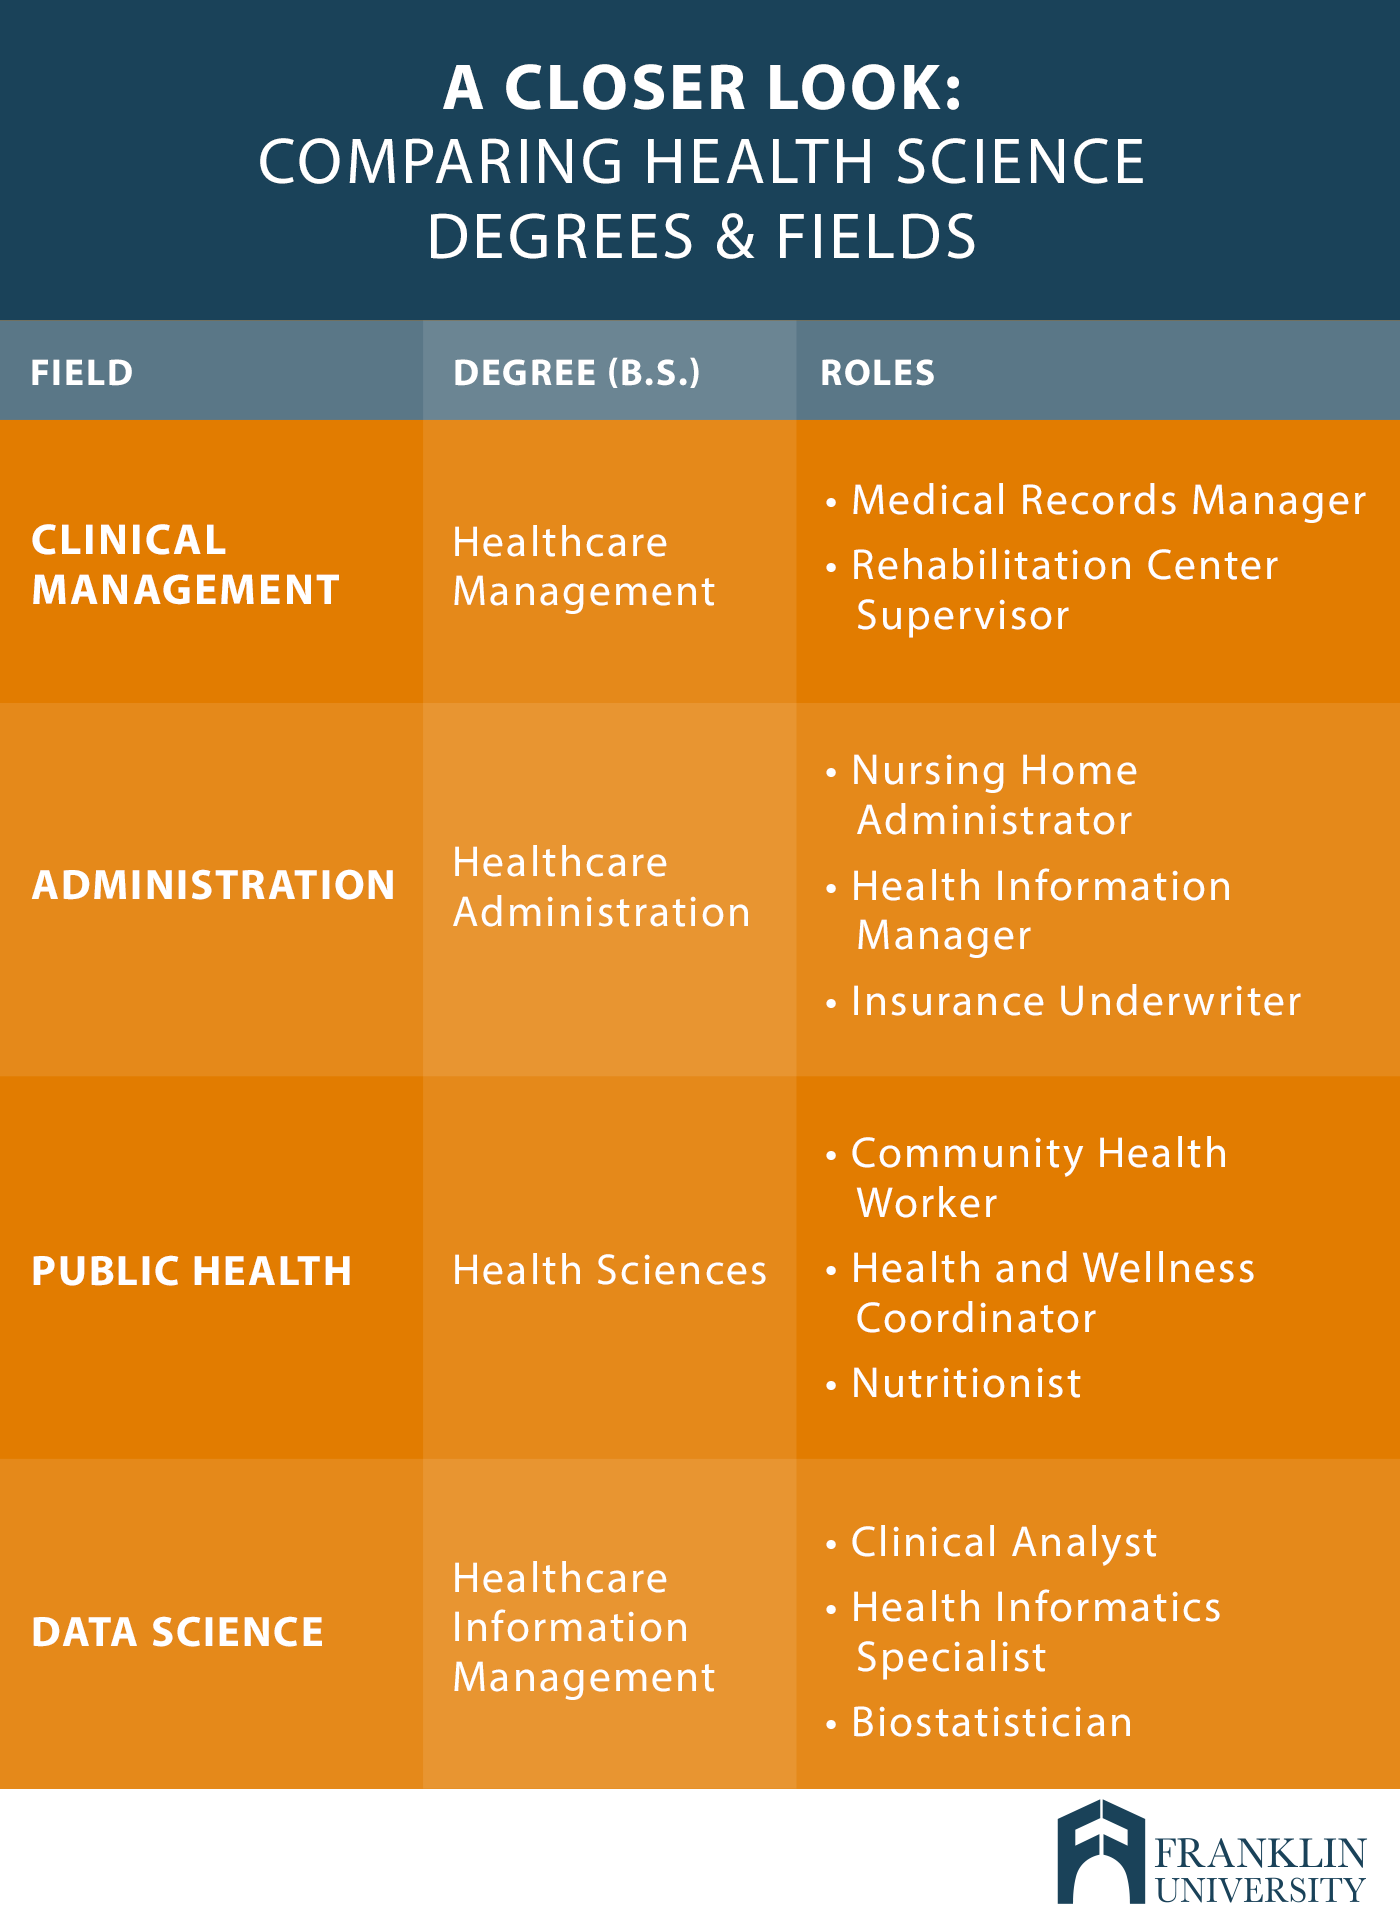 graphic describes comparing health science degrees and fields